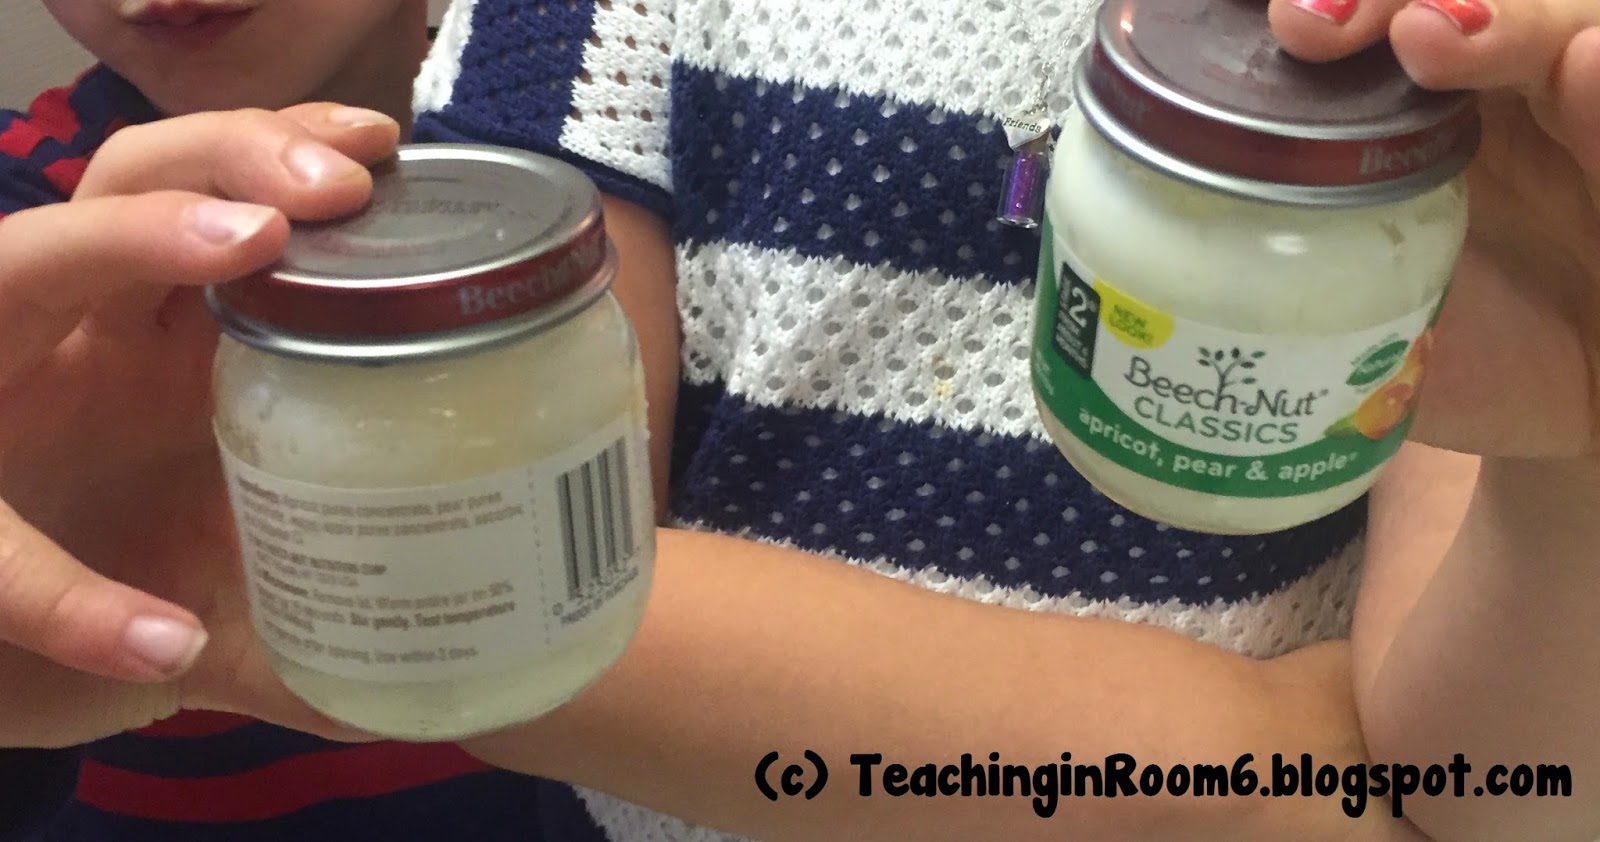 Physical science in a 5th grade class by making butter!